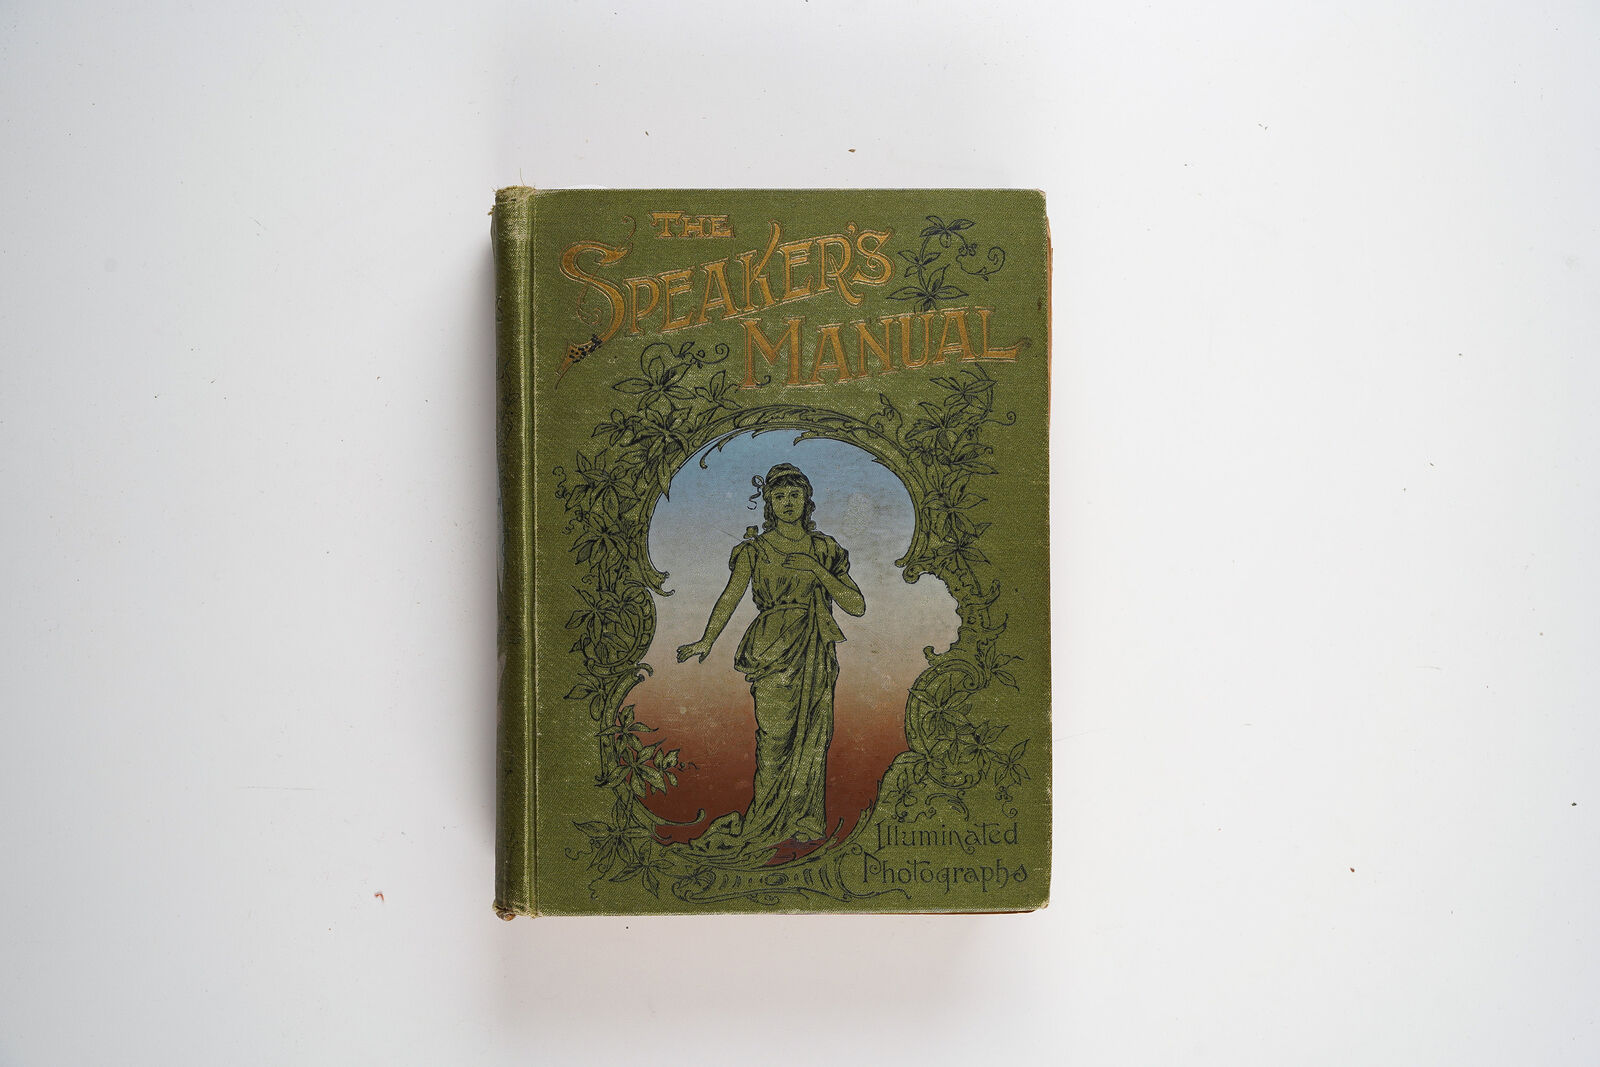 The Speaker's Manual Of Perfect Elocution by Flora N. Kightlinger 1889